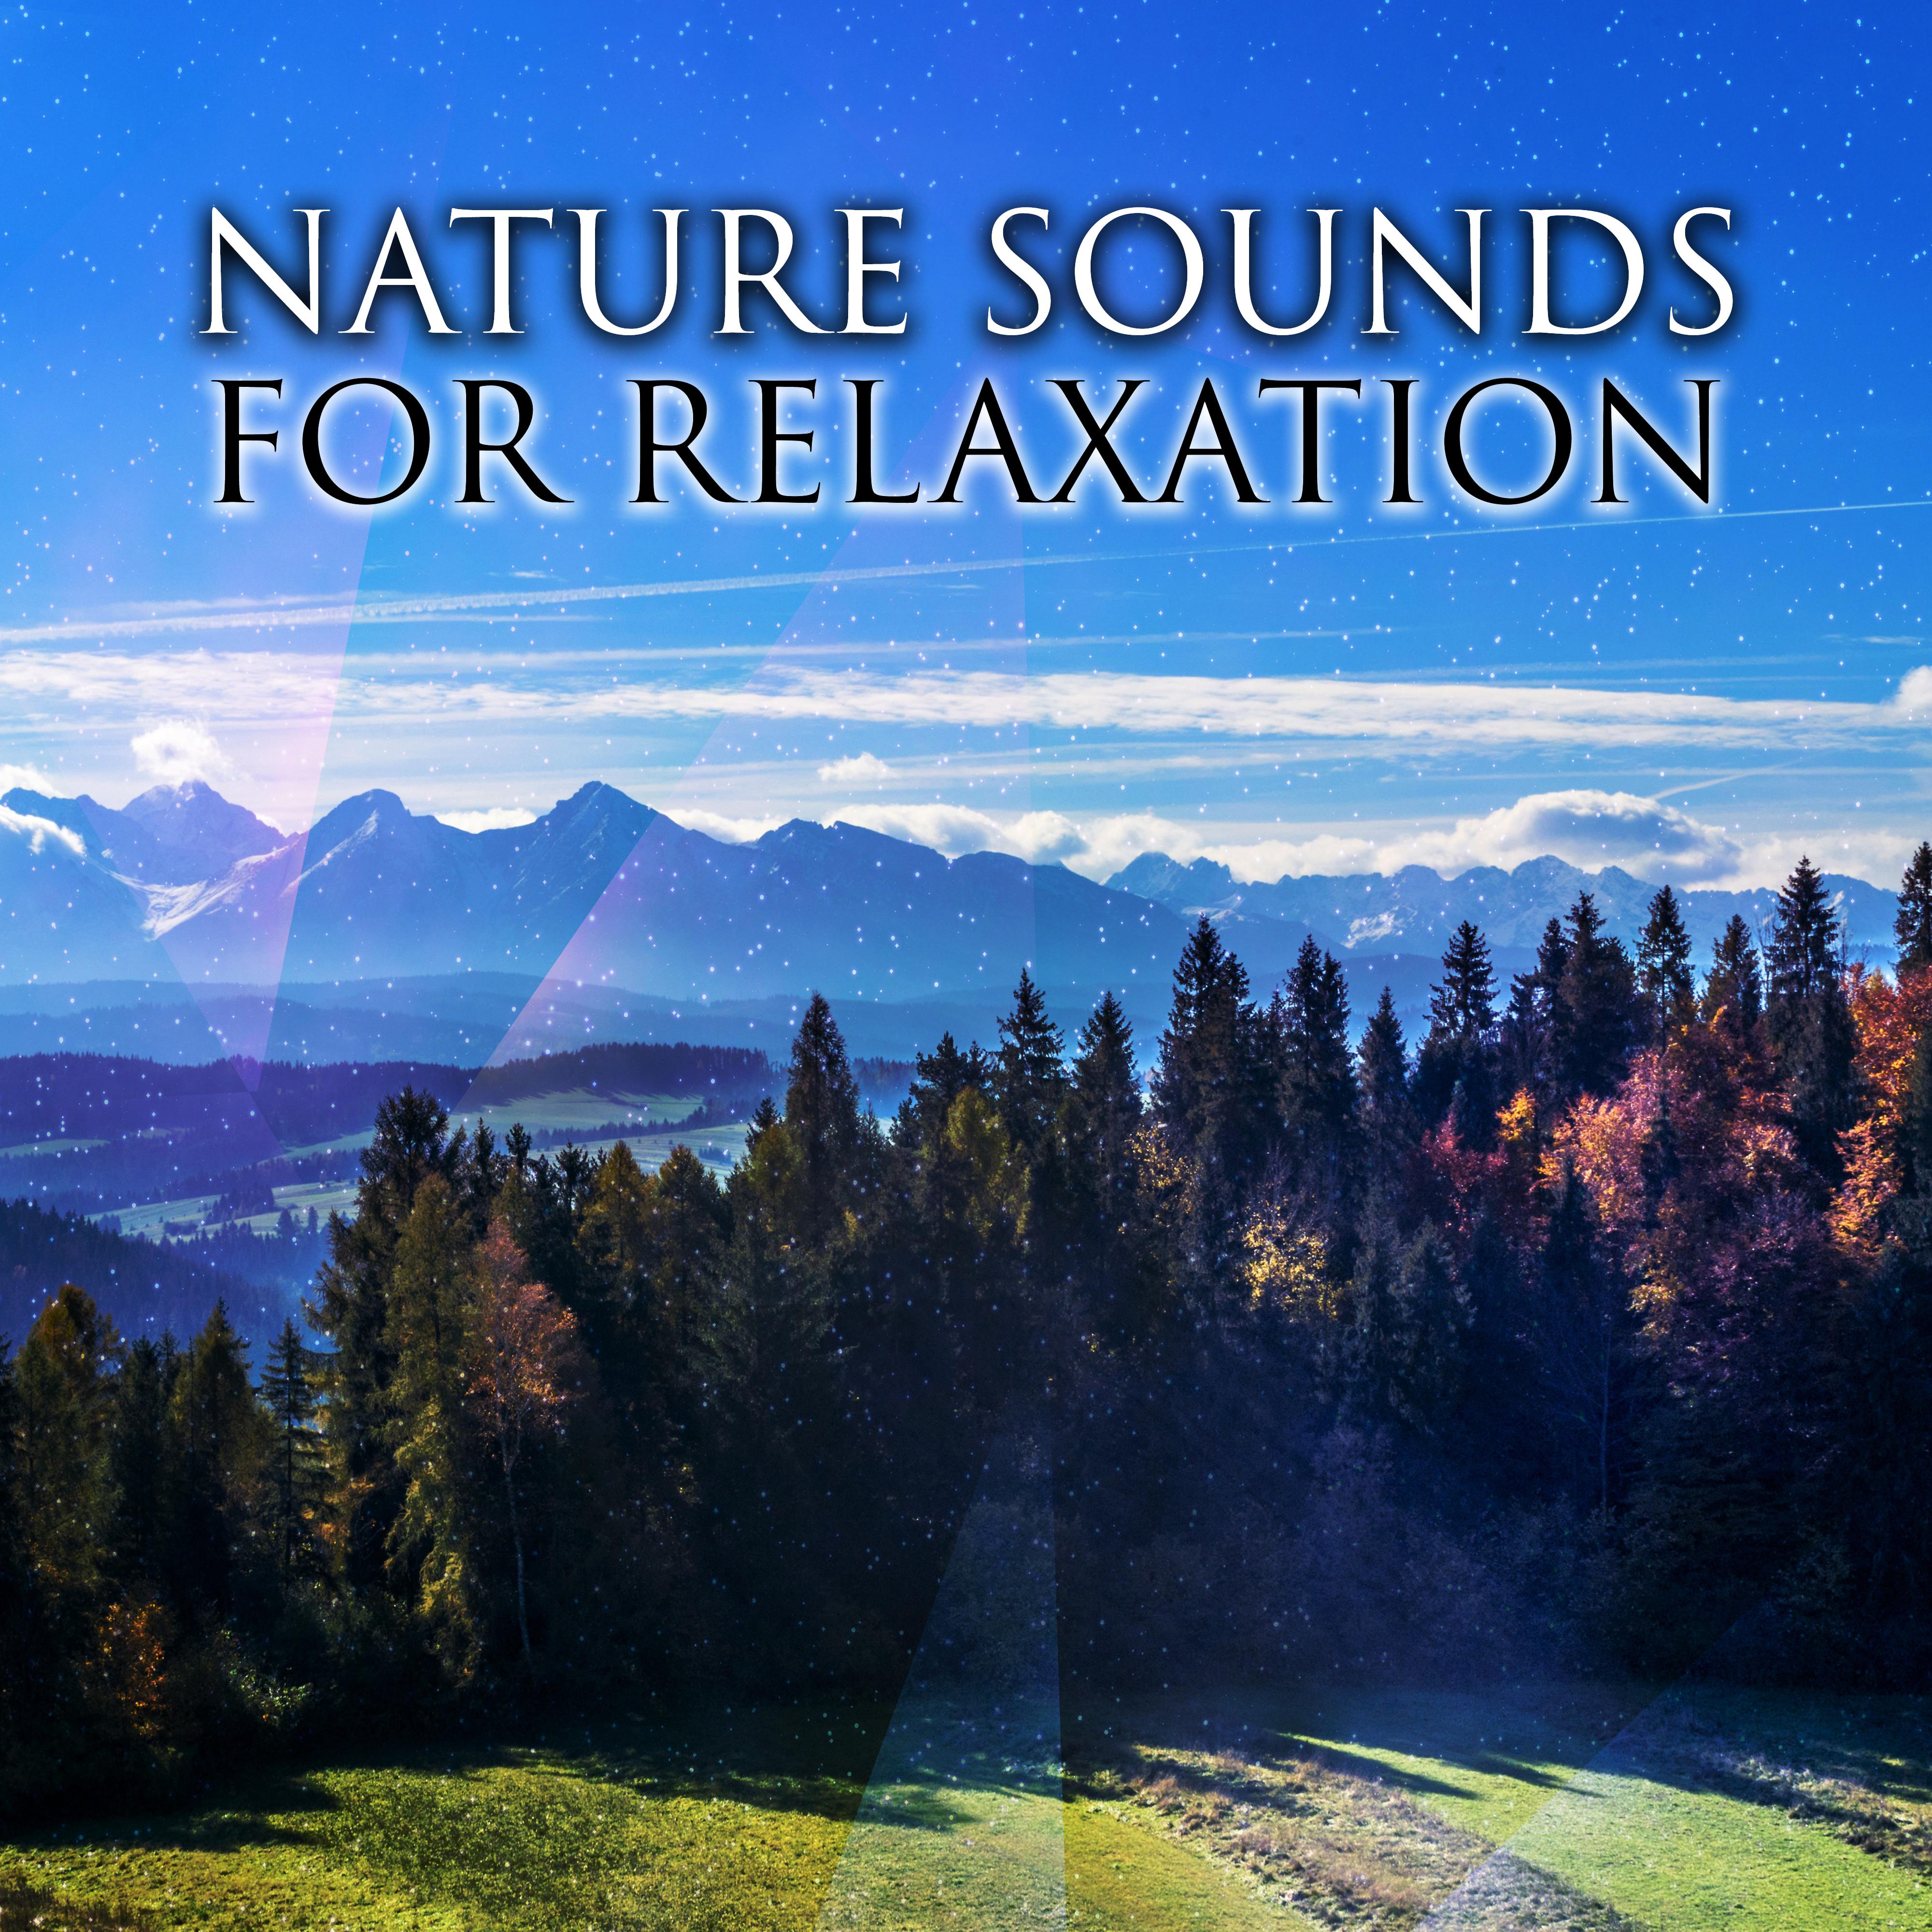 Nature Sounds for Relaxation  Peaceful Music to Rest, Calm Down with New Age Music, Nature Waves, Stress Relief